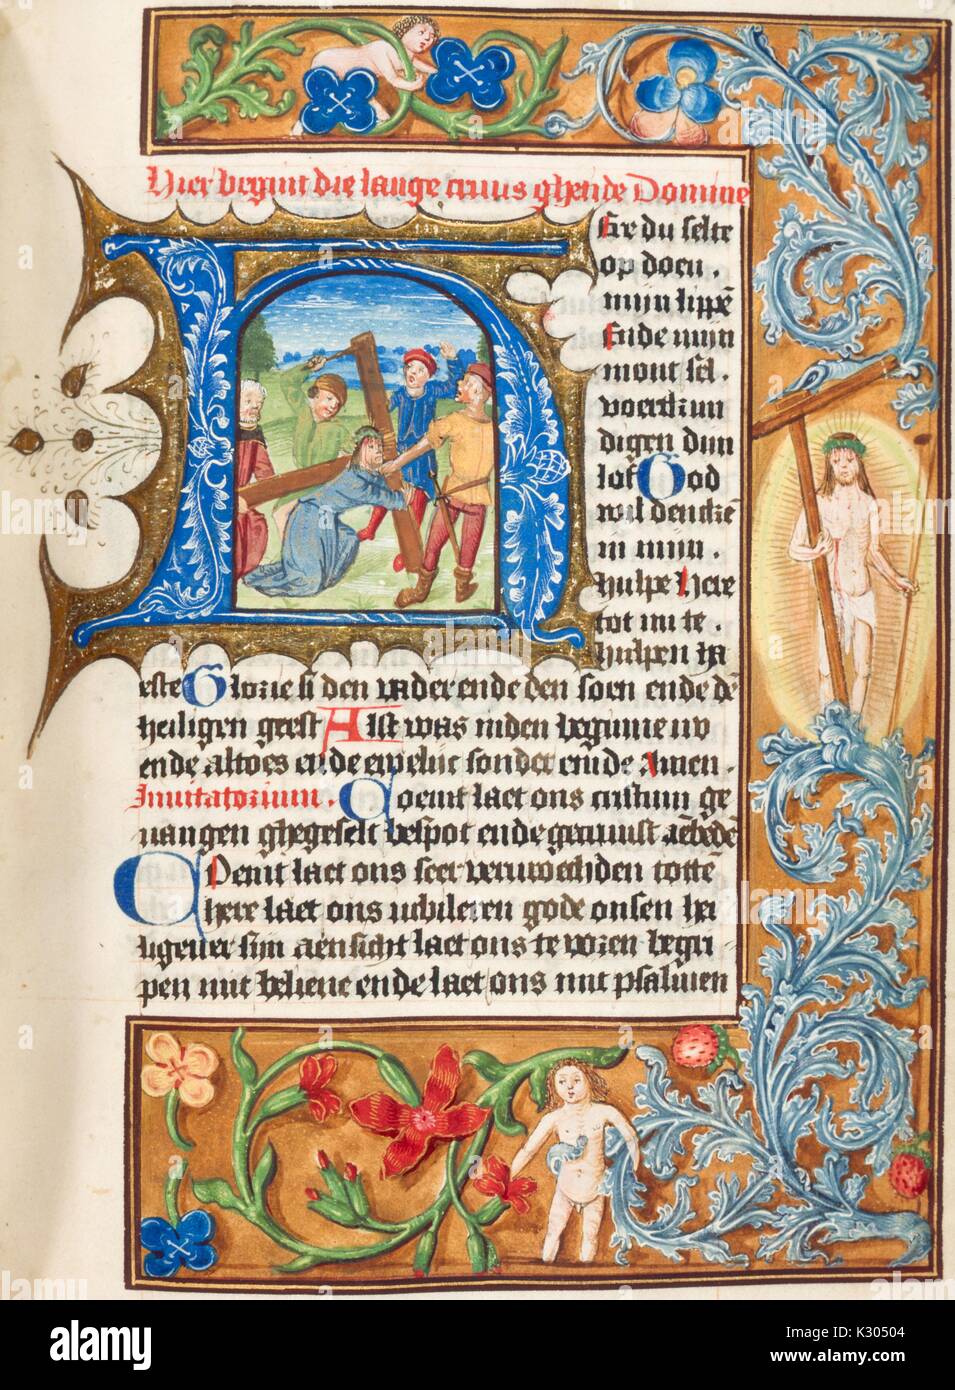 Illuminated manuscript page depicting Jesus Christ holding a crucifix on his back, from the 'Hier beghint die vrouwe ghetide Domine, ' a 15th century Dutch book of hours, 2013. Stock Photo